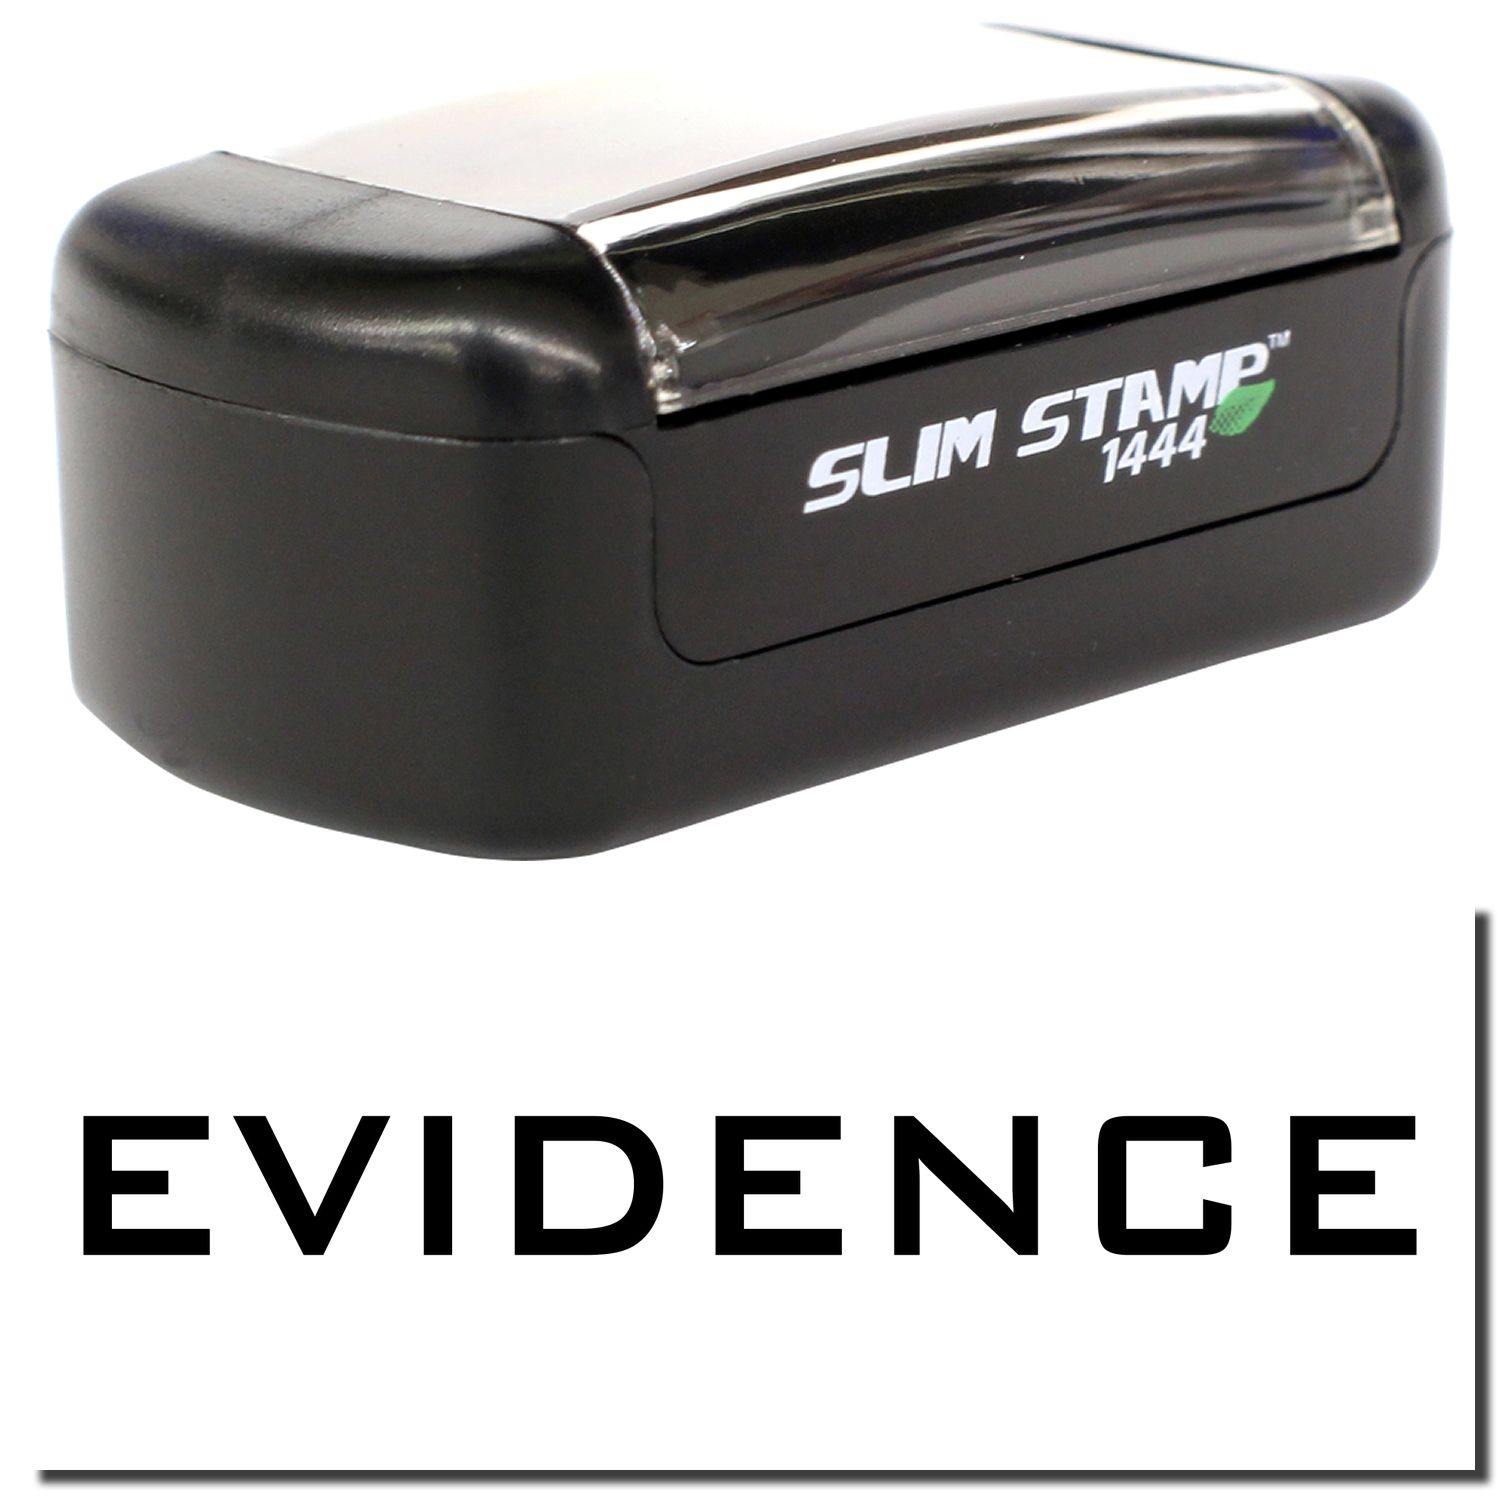 A stock office pre-inked stamp with a stamped image showing how the text "EVIDENCE" is displayed after stamping.